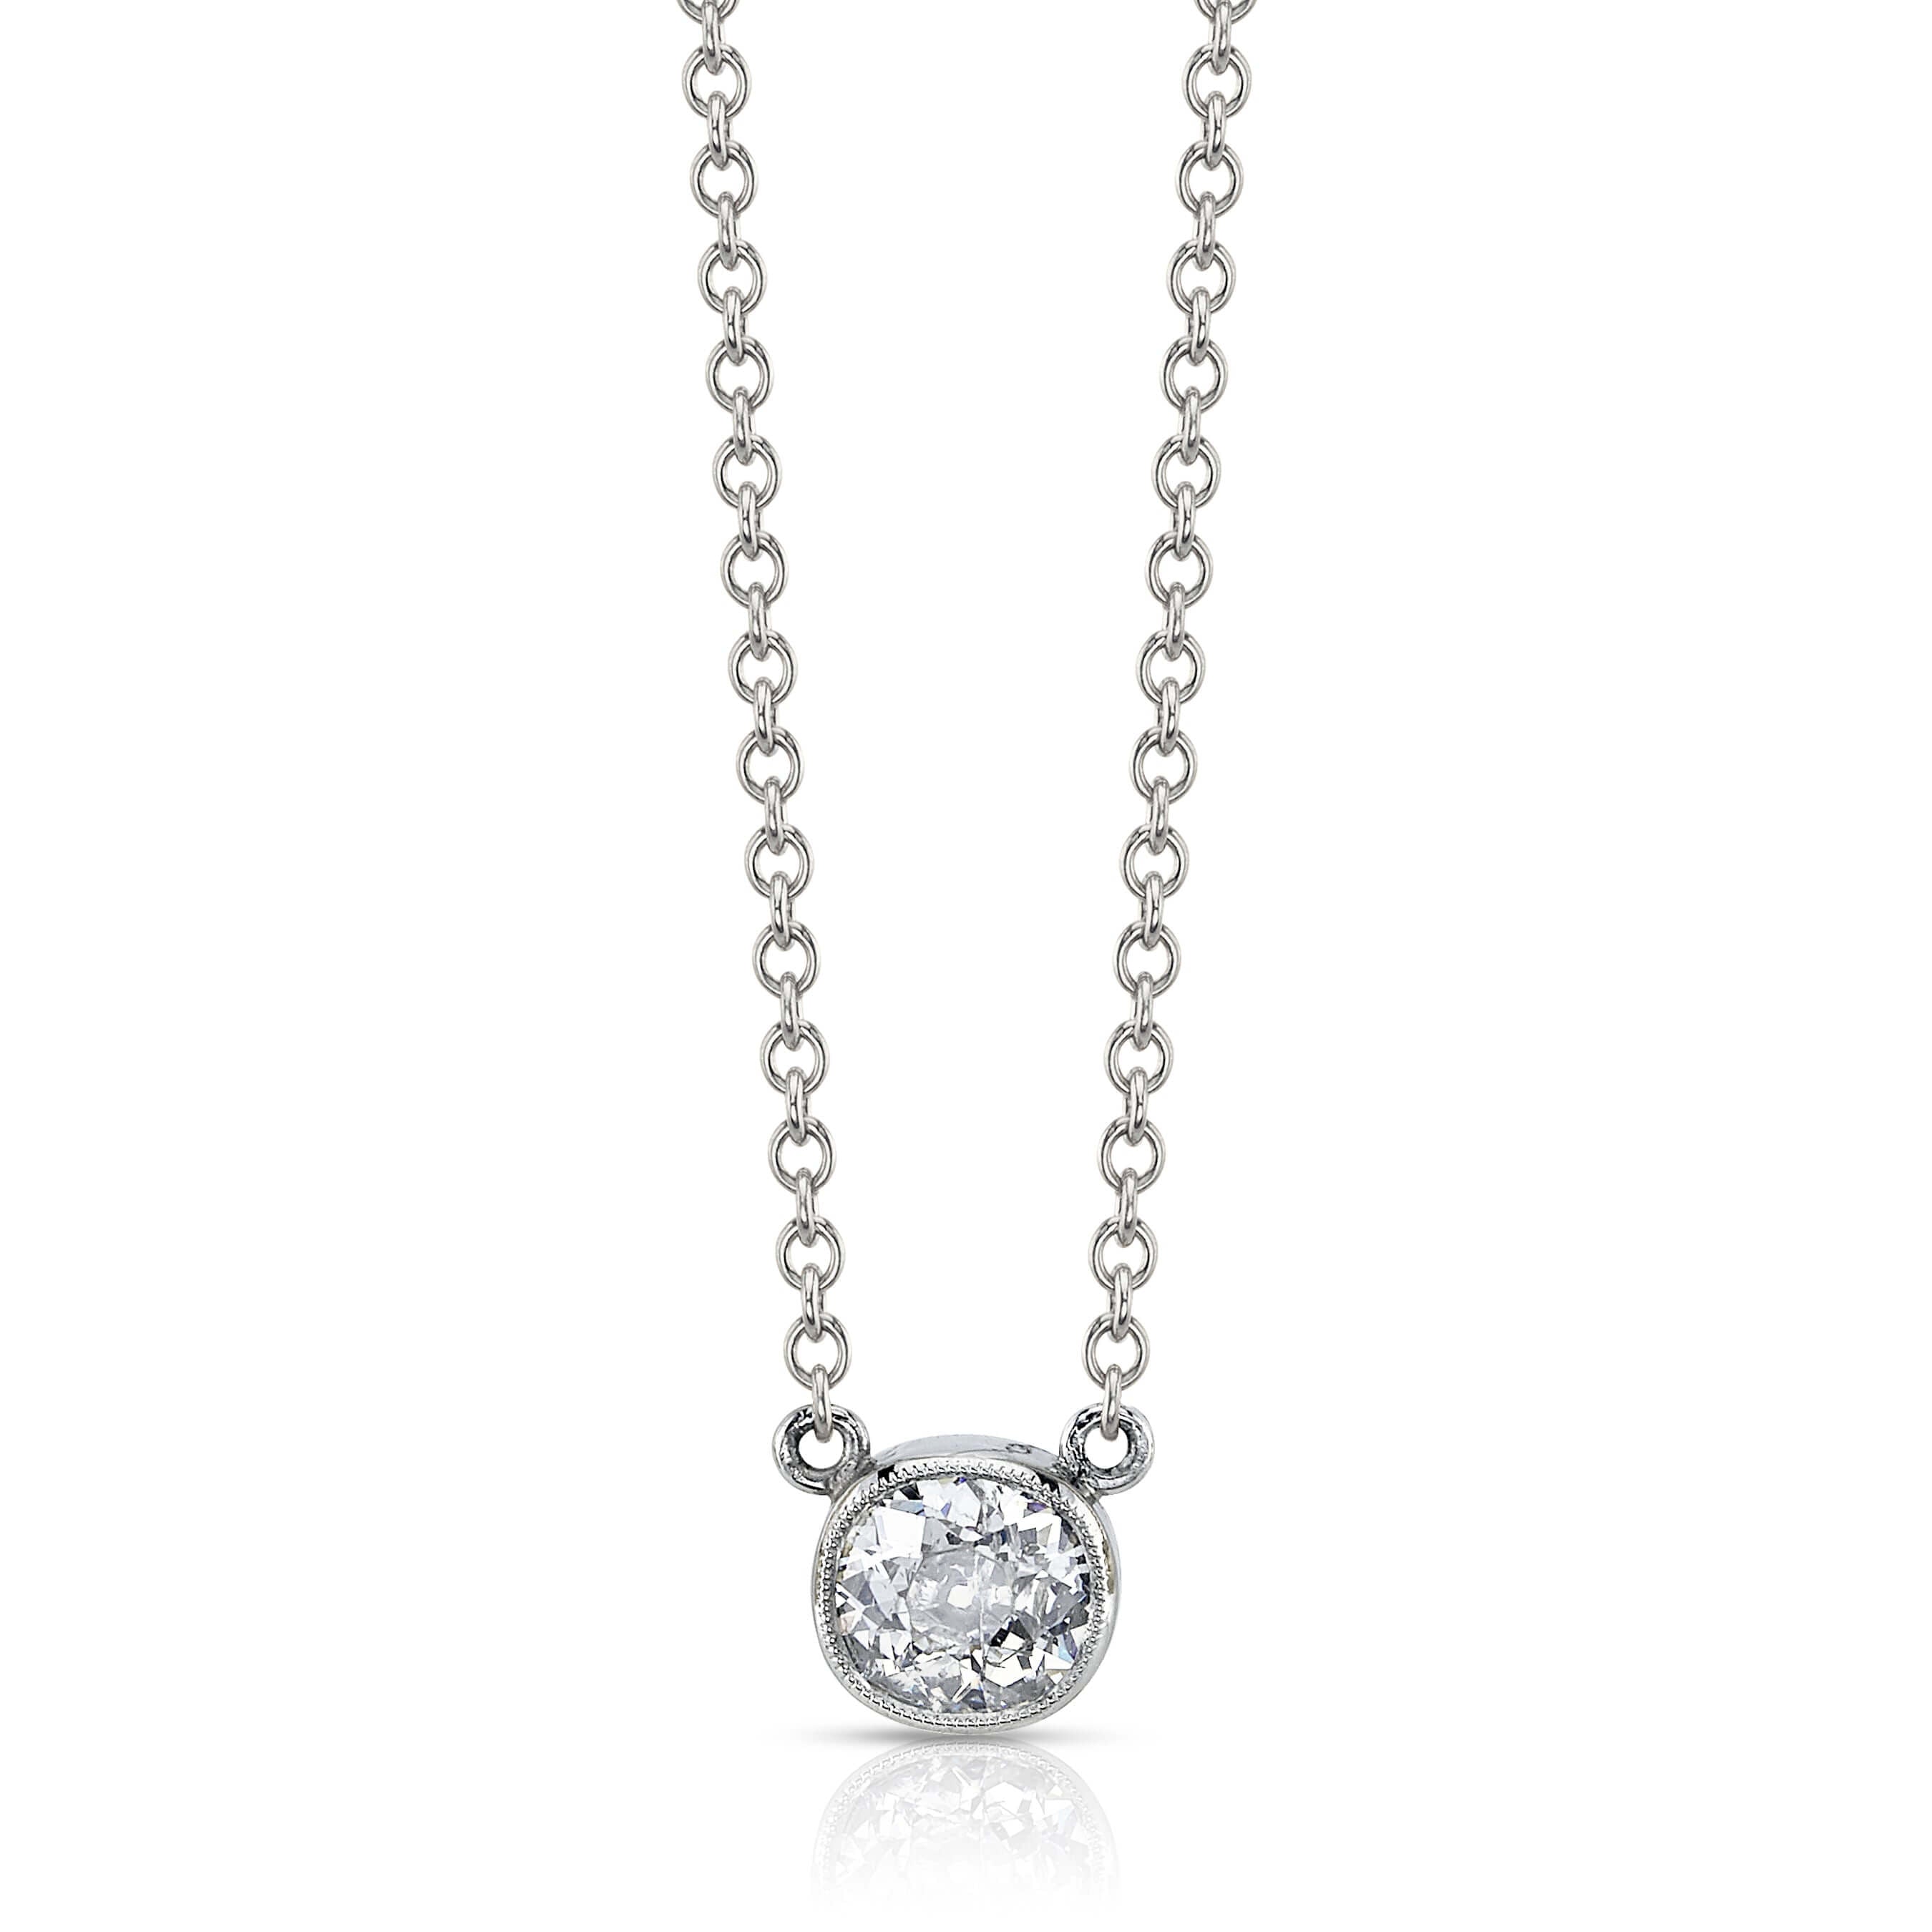 SINGLE STONE LINCOLN NECKLACE featuring 0.65ctw J/I1 antique cushion cut diamond bezel set on a handcrafted platinum necklace. Necklace measures 17".